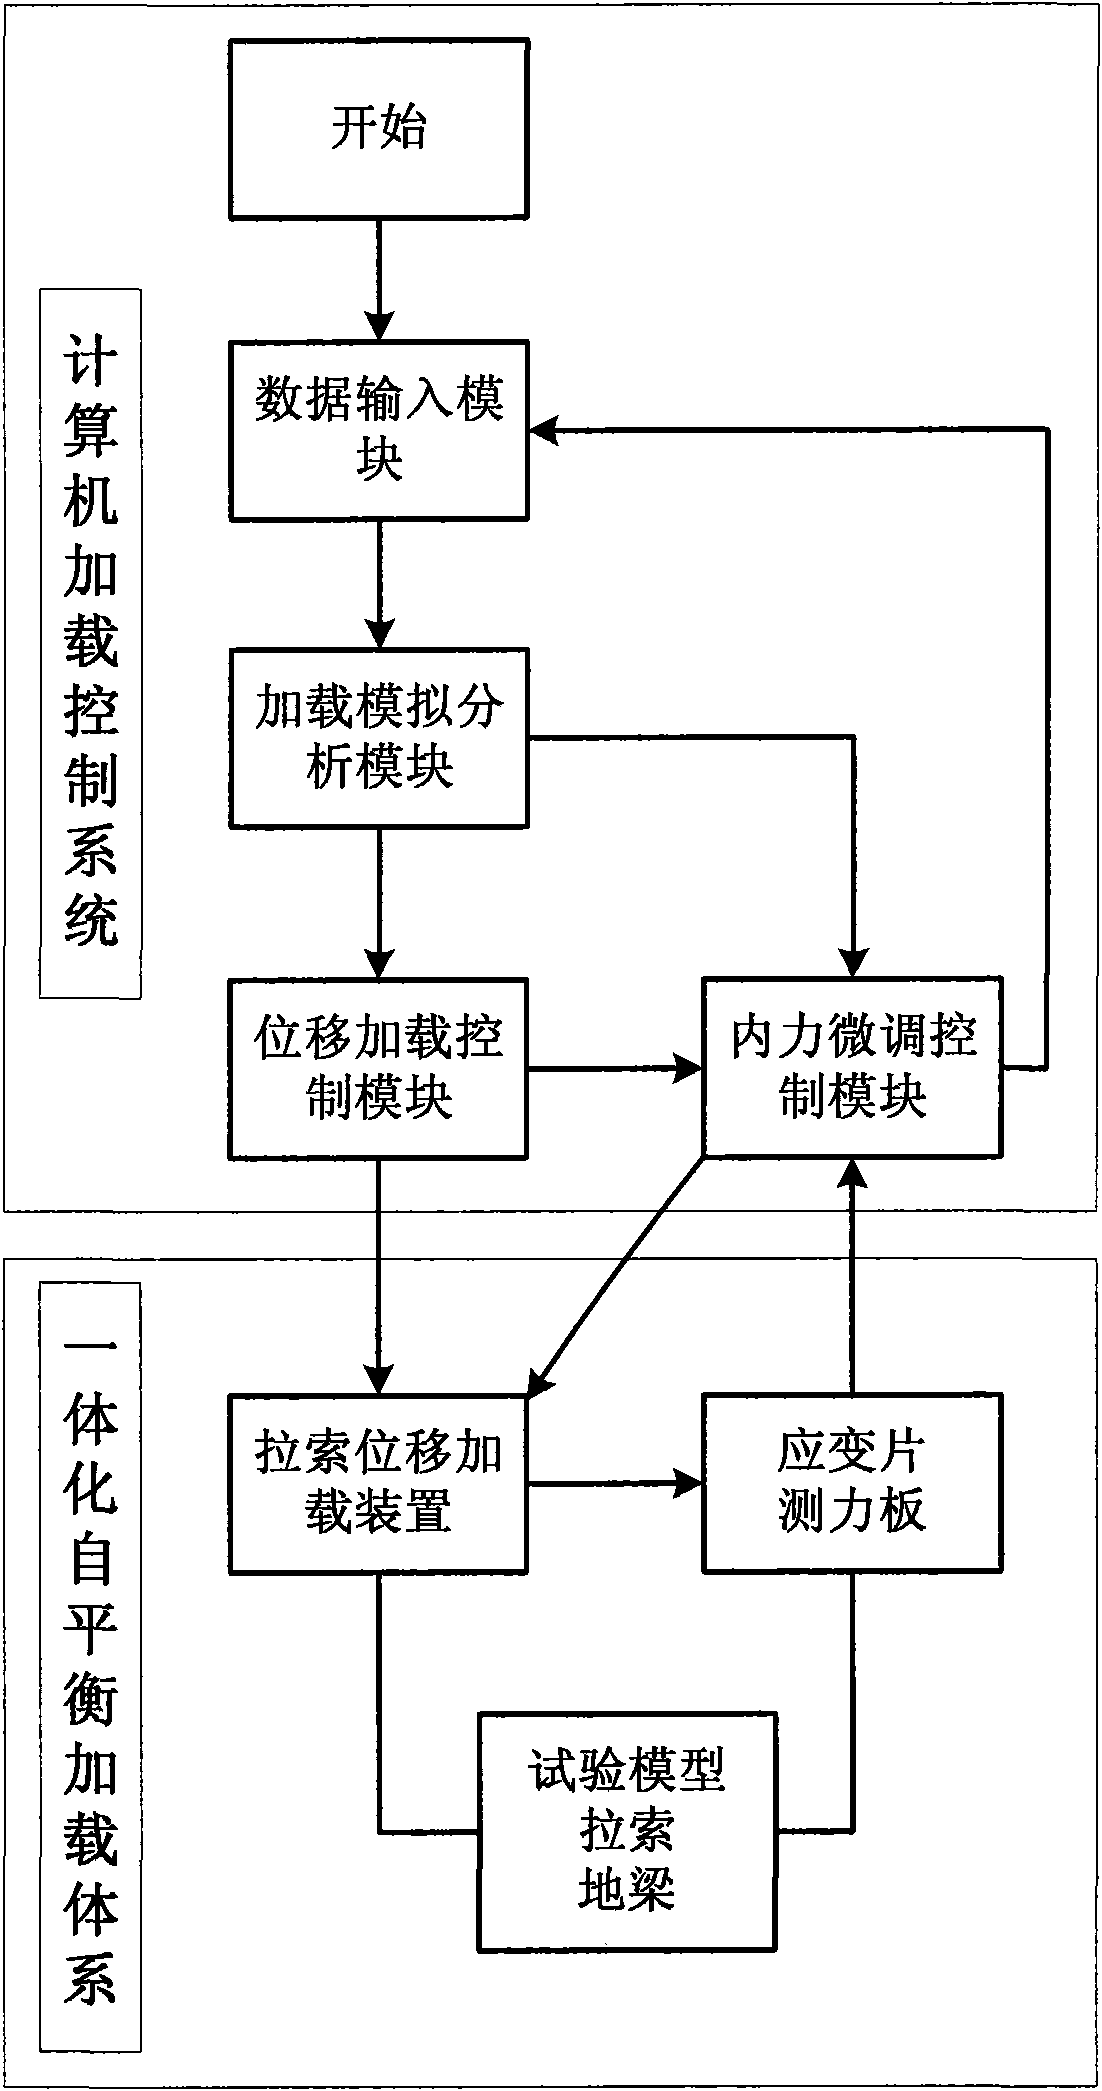 Spatial structure integral model test cable force self-balanced loading control method